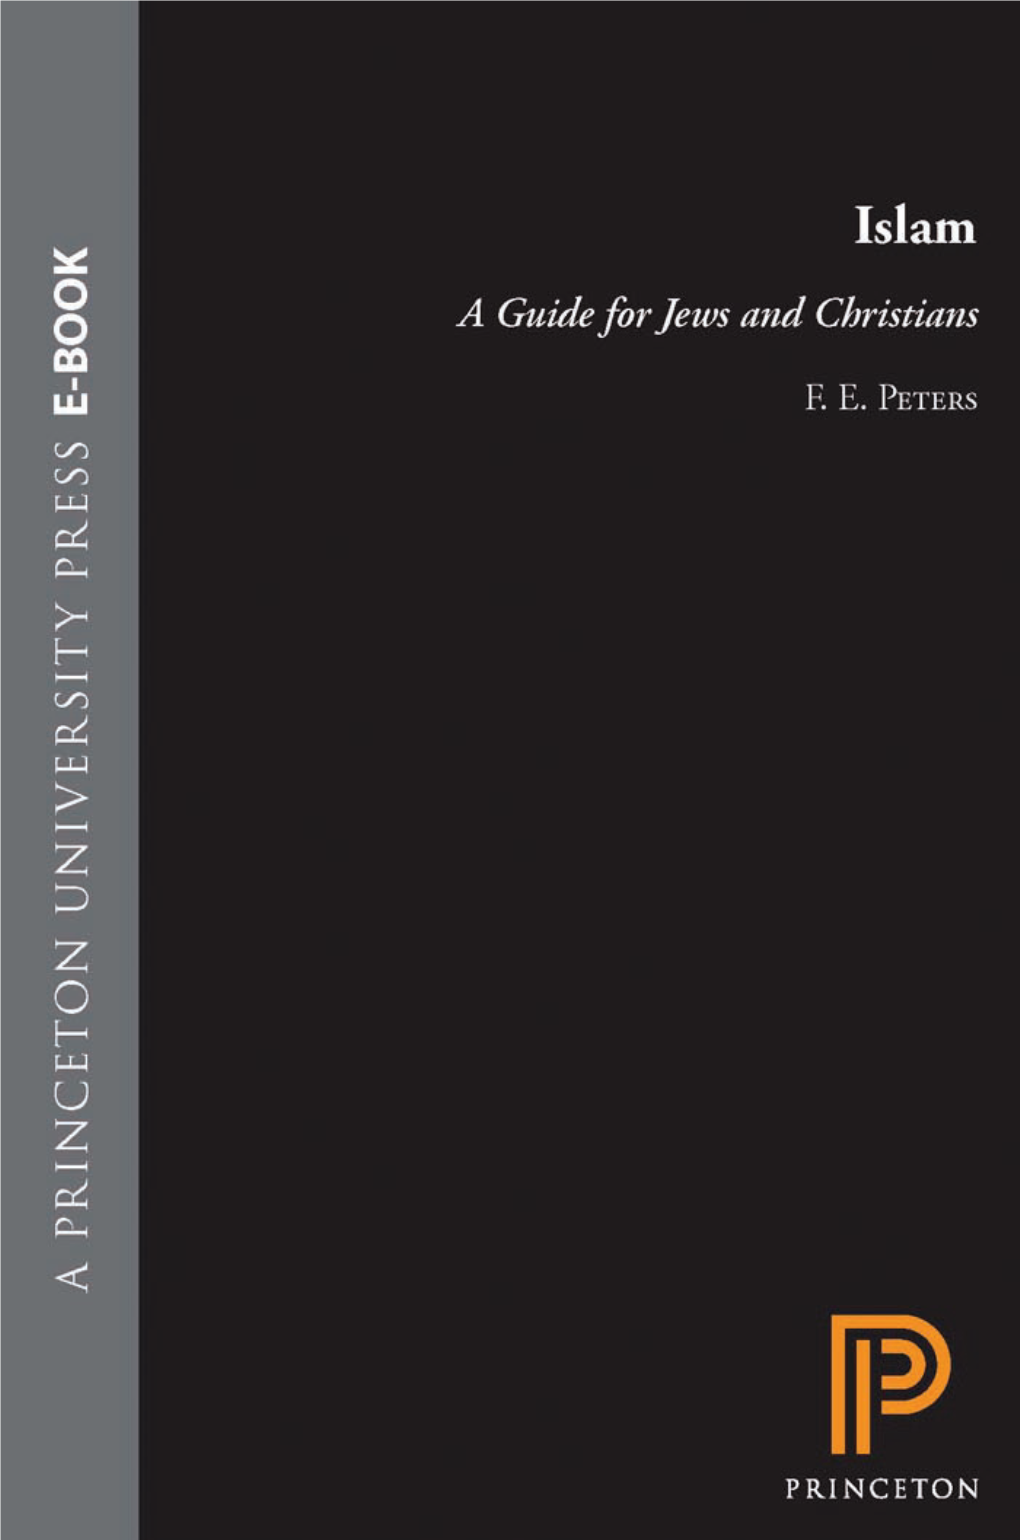 Islam: a Guide for Jews and Christians / F.E